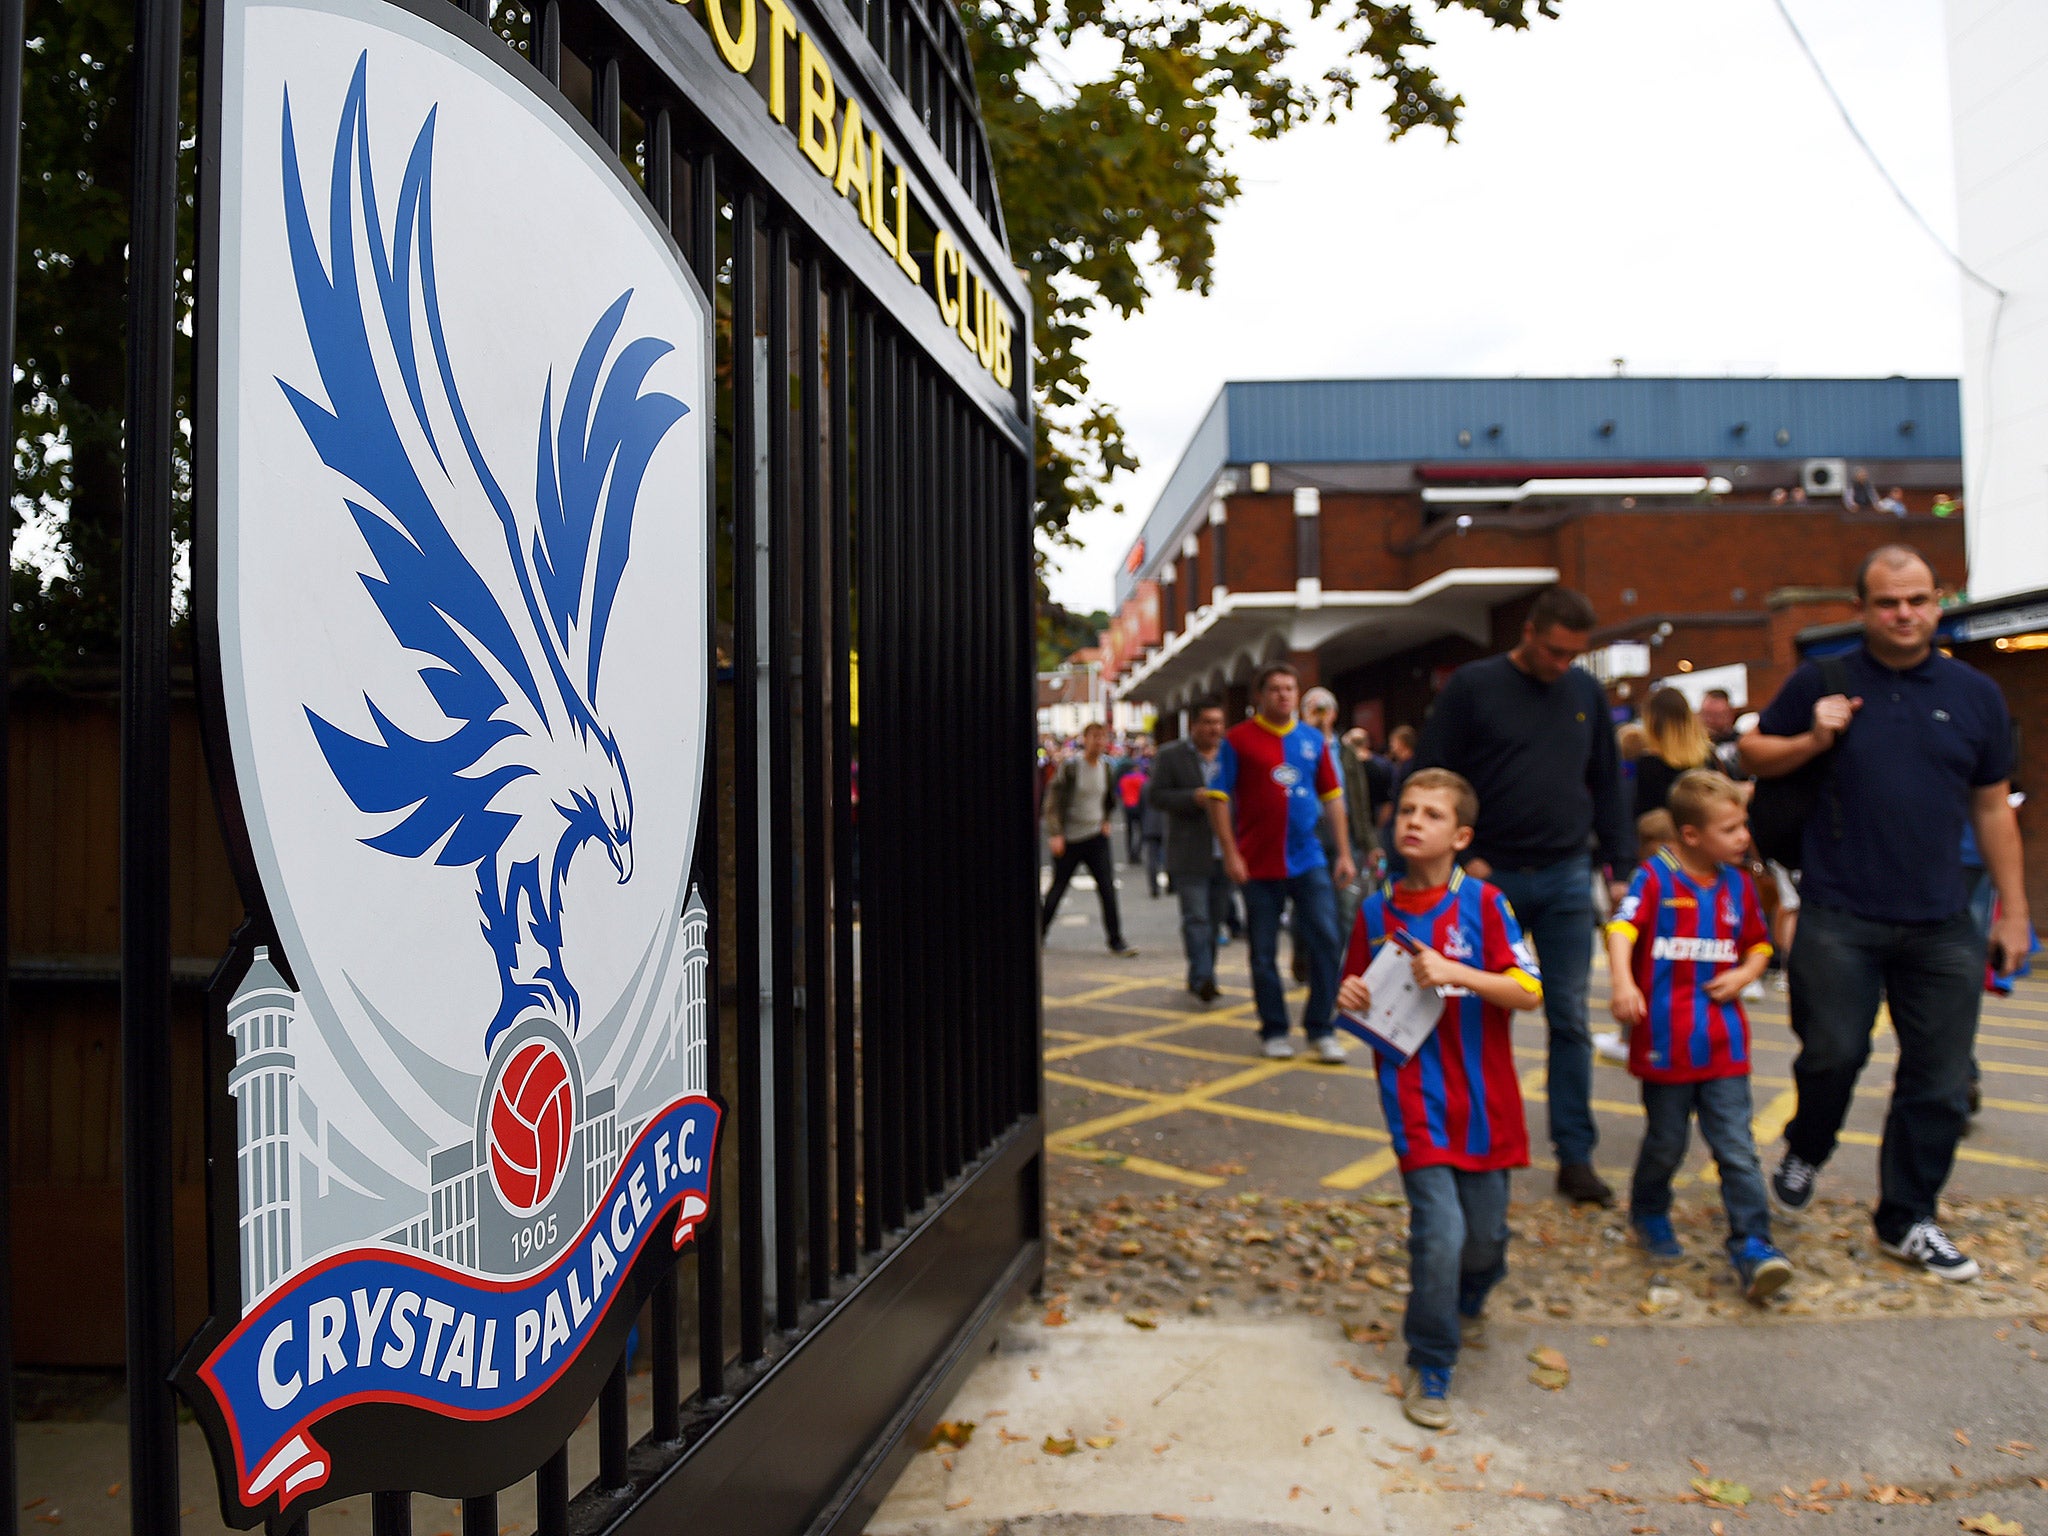 Crystal Palce fans outside Selhurst Park, where today's early kick-off takes place